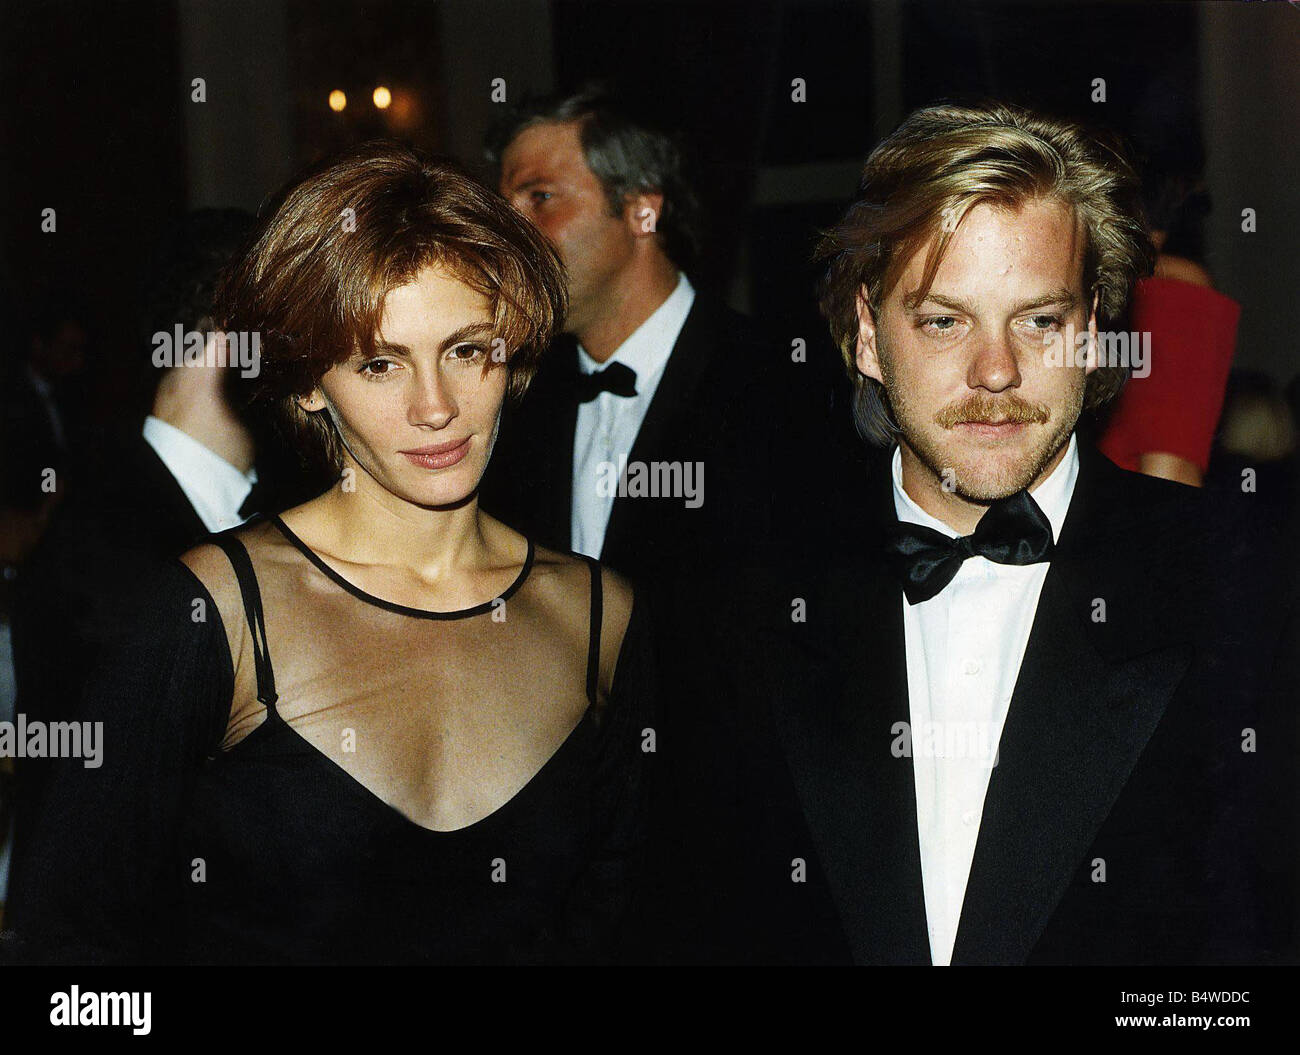 Kiefer Sutherland Actor with Actress Julia Roberts Stock Photo